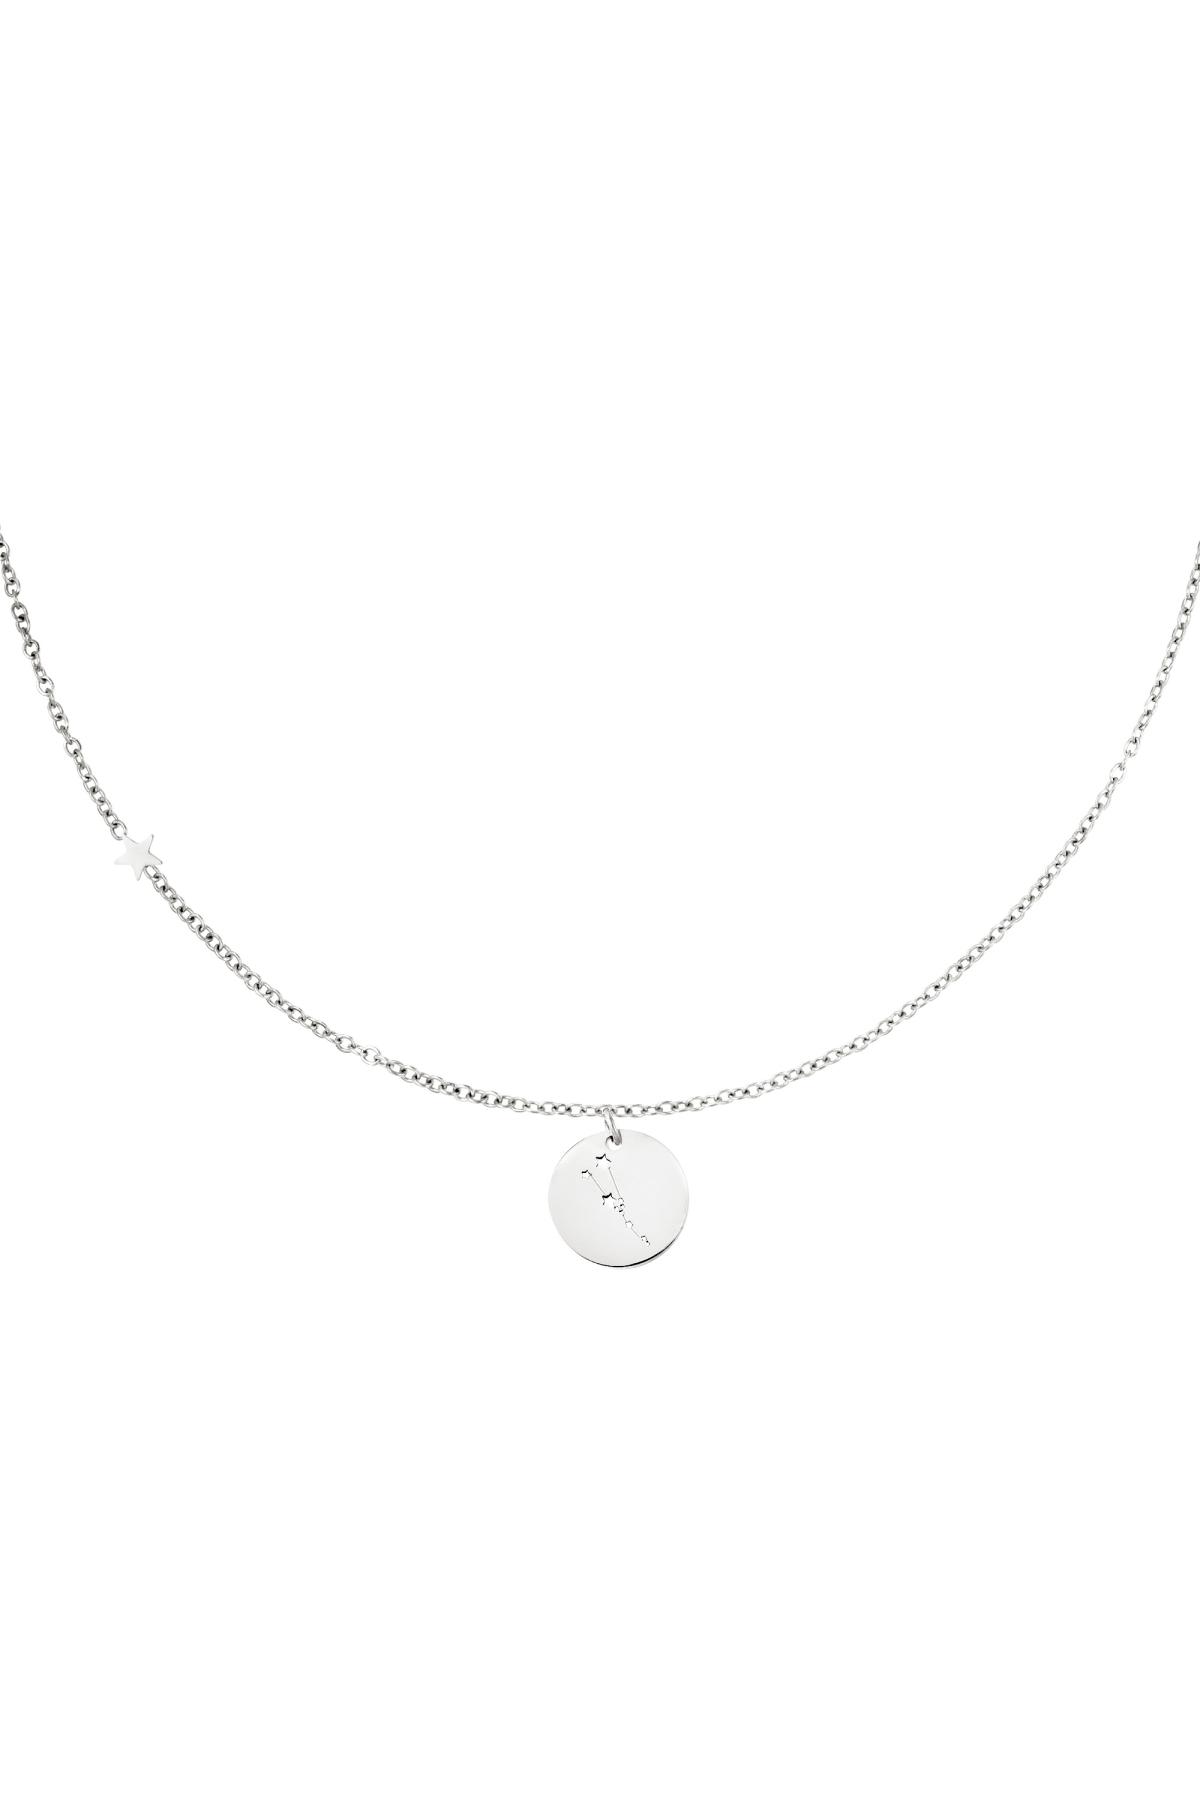 Silver / Necklace zodiac sign Taurus Silver Stainless Steel 